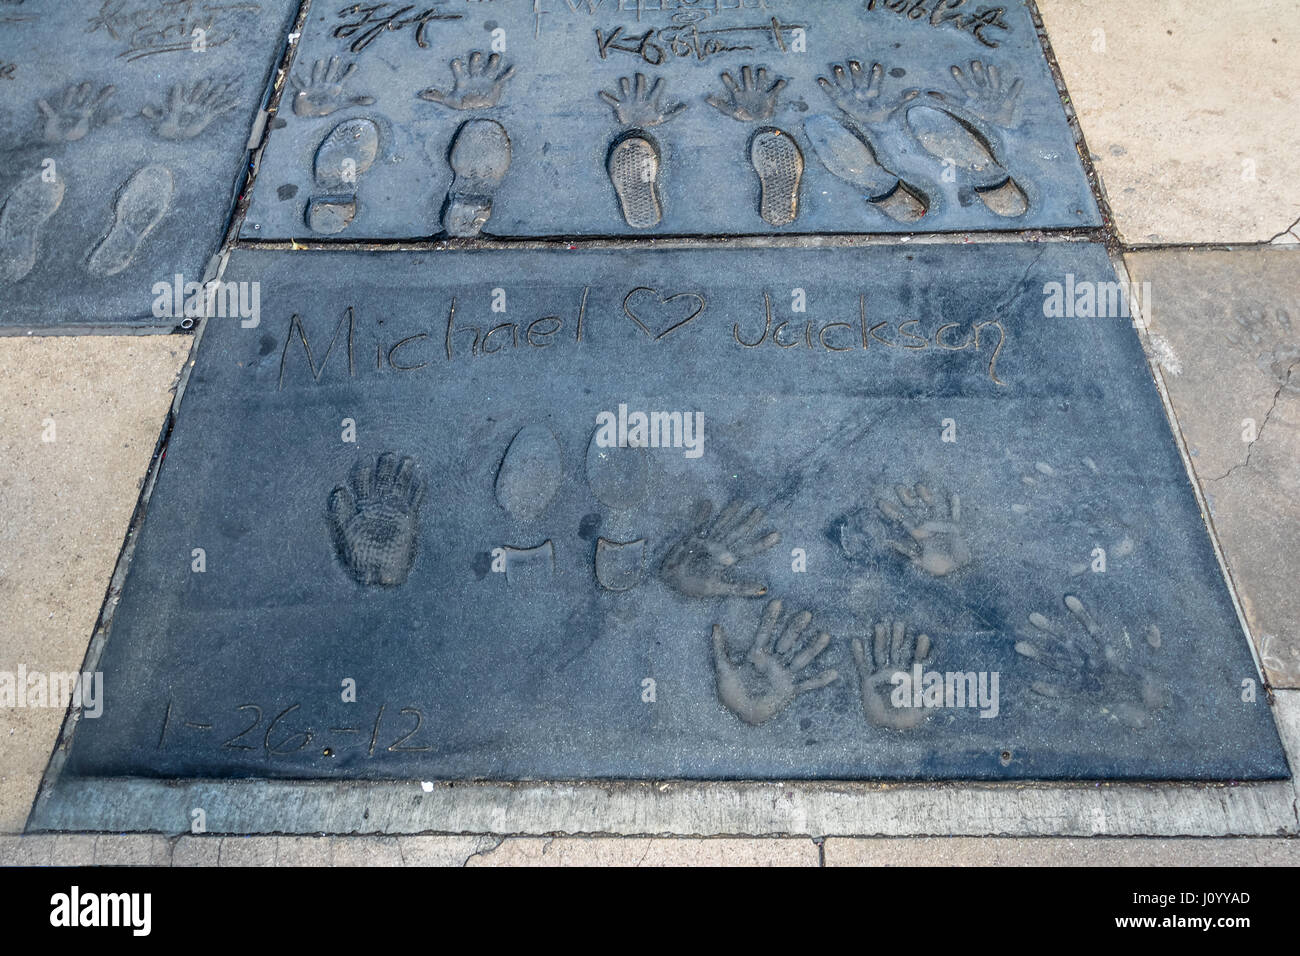 Michael Jackson handprints in Hollywood Boulevard in front of Chinese Theater - Los Angeles California, USA Stock Photo